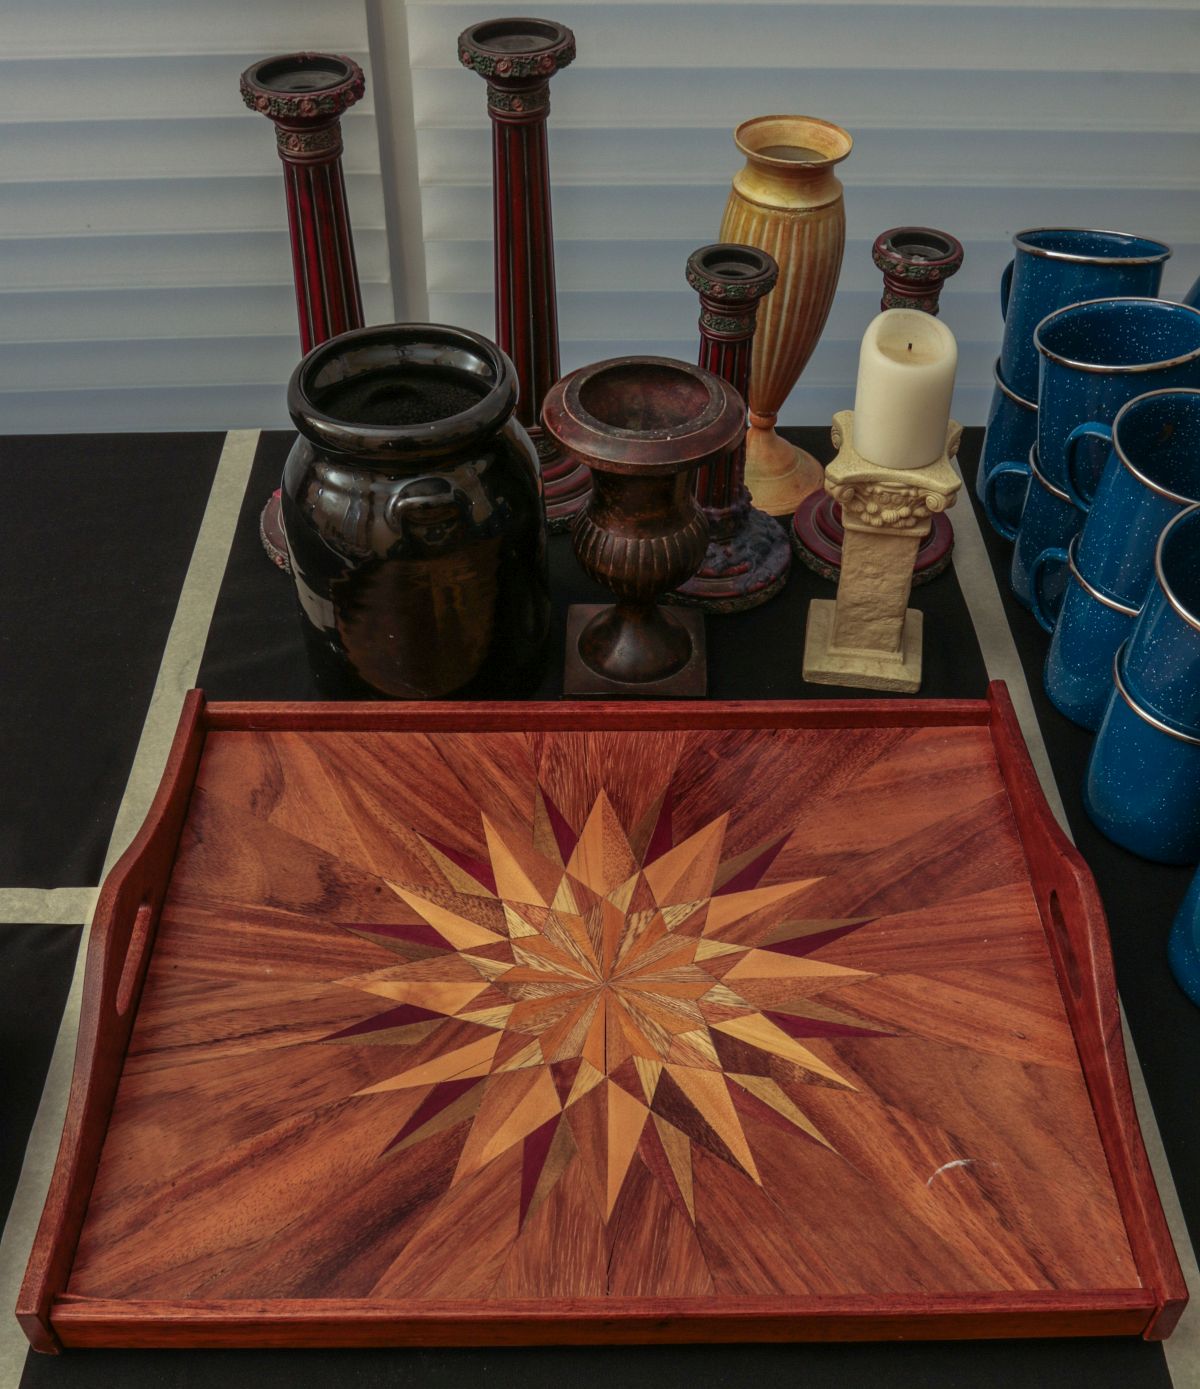 AN INLAID WOOD TRAY AND OTHER OBJECTS